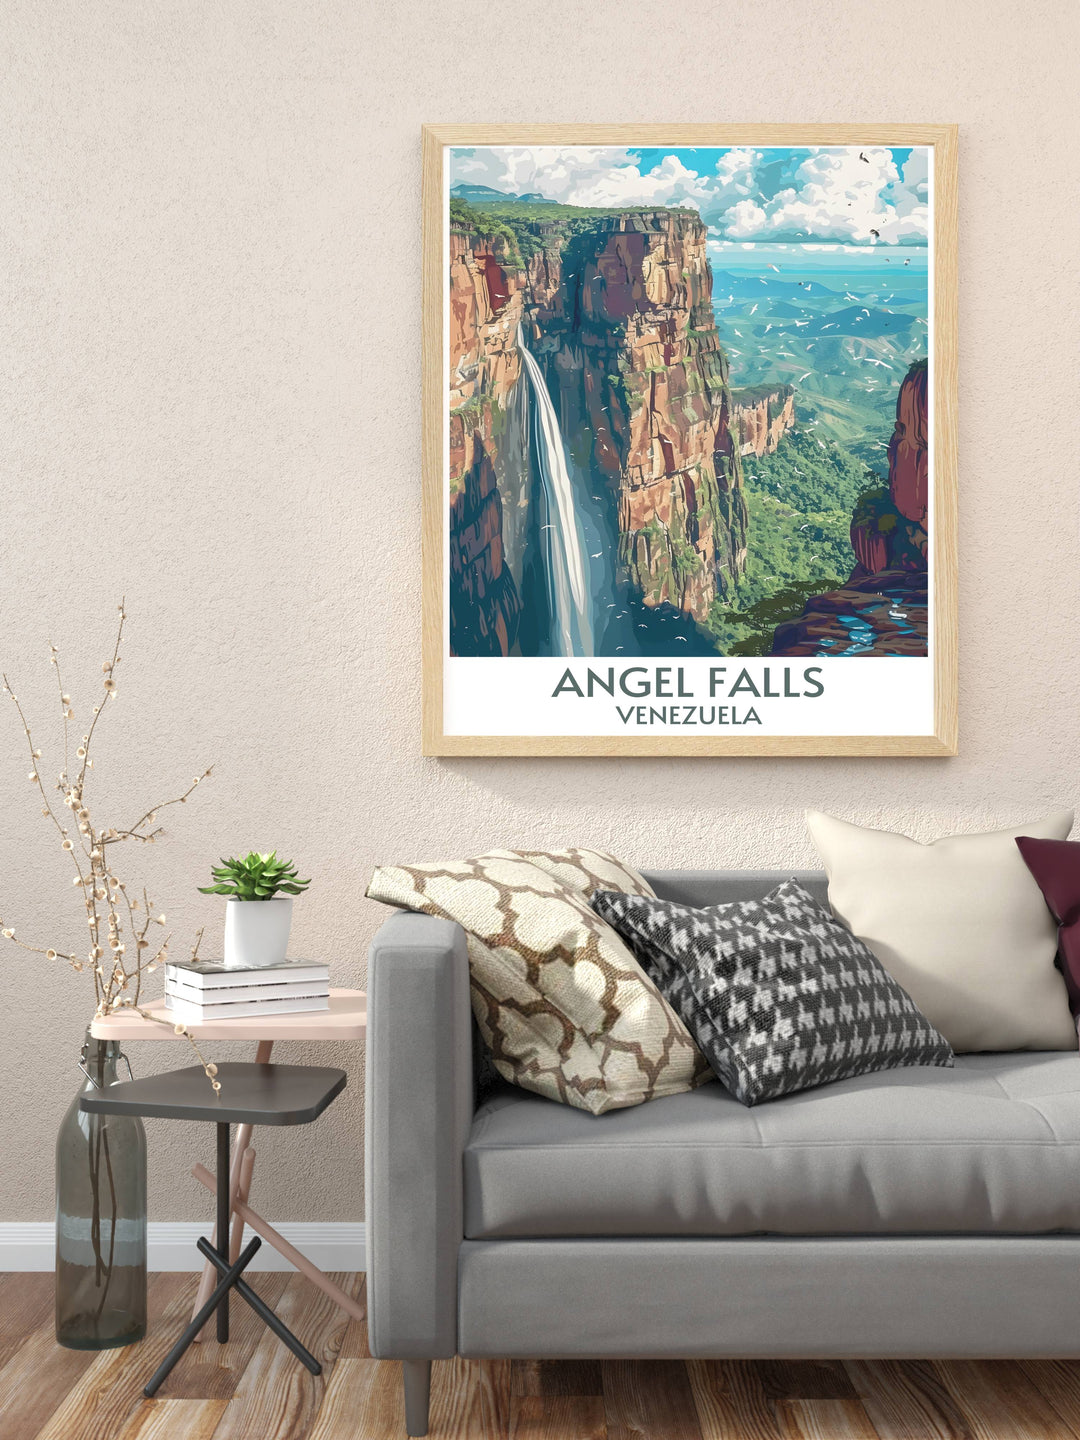 Gift a piece of Venezuela with this exquisite print featuring Auyan tepui and Angel Falls, ideal for marking special occasions with a touch of adventure.